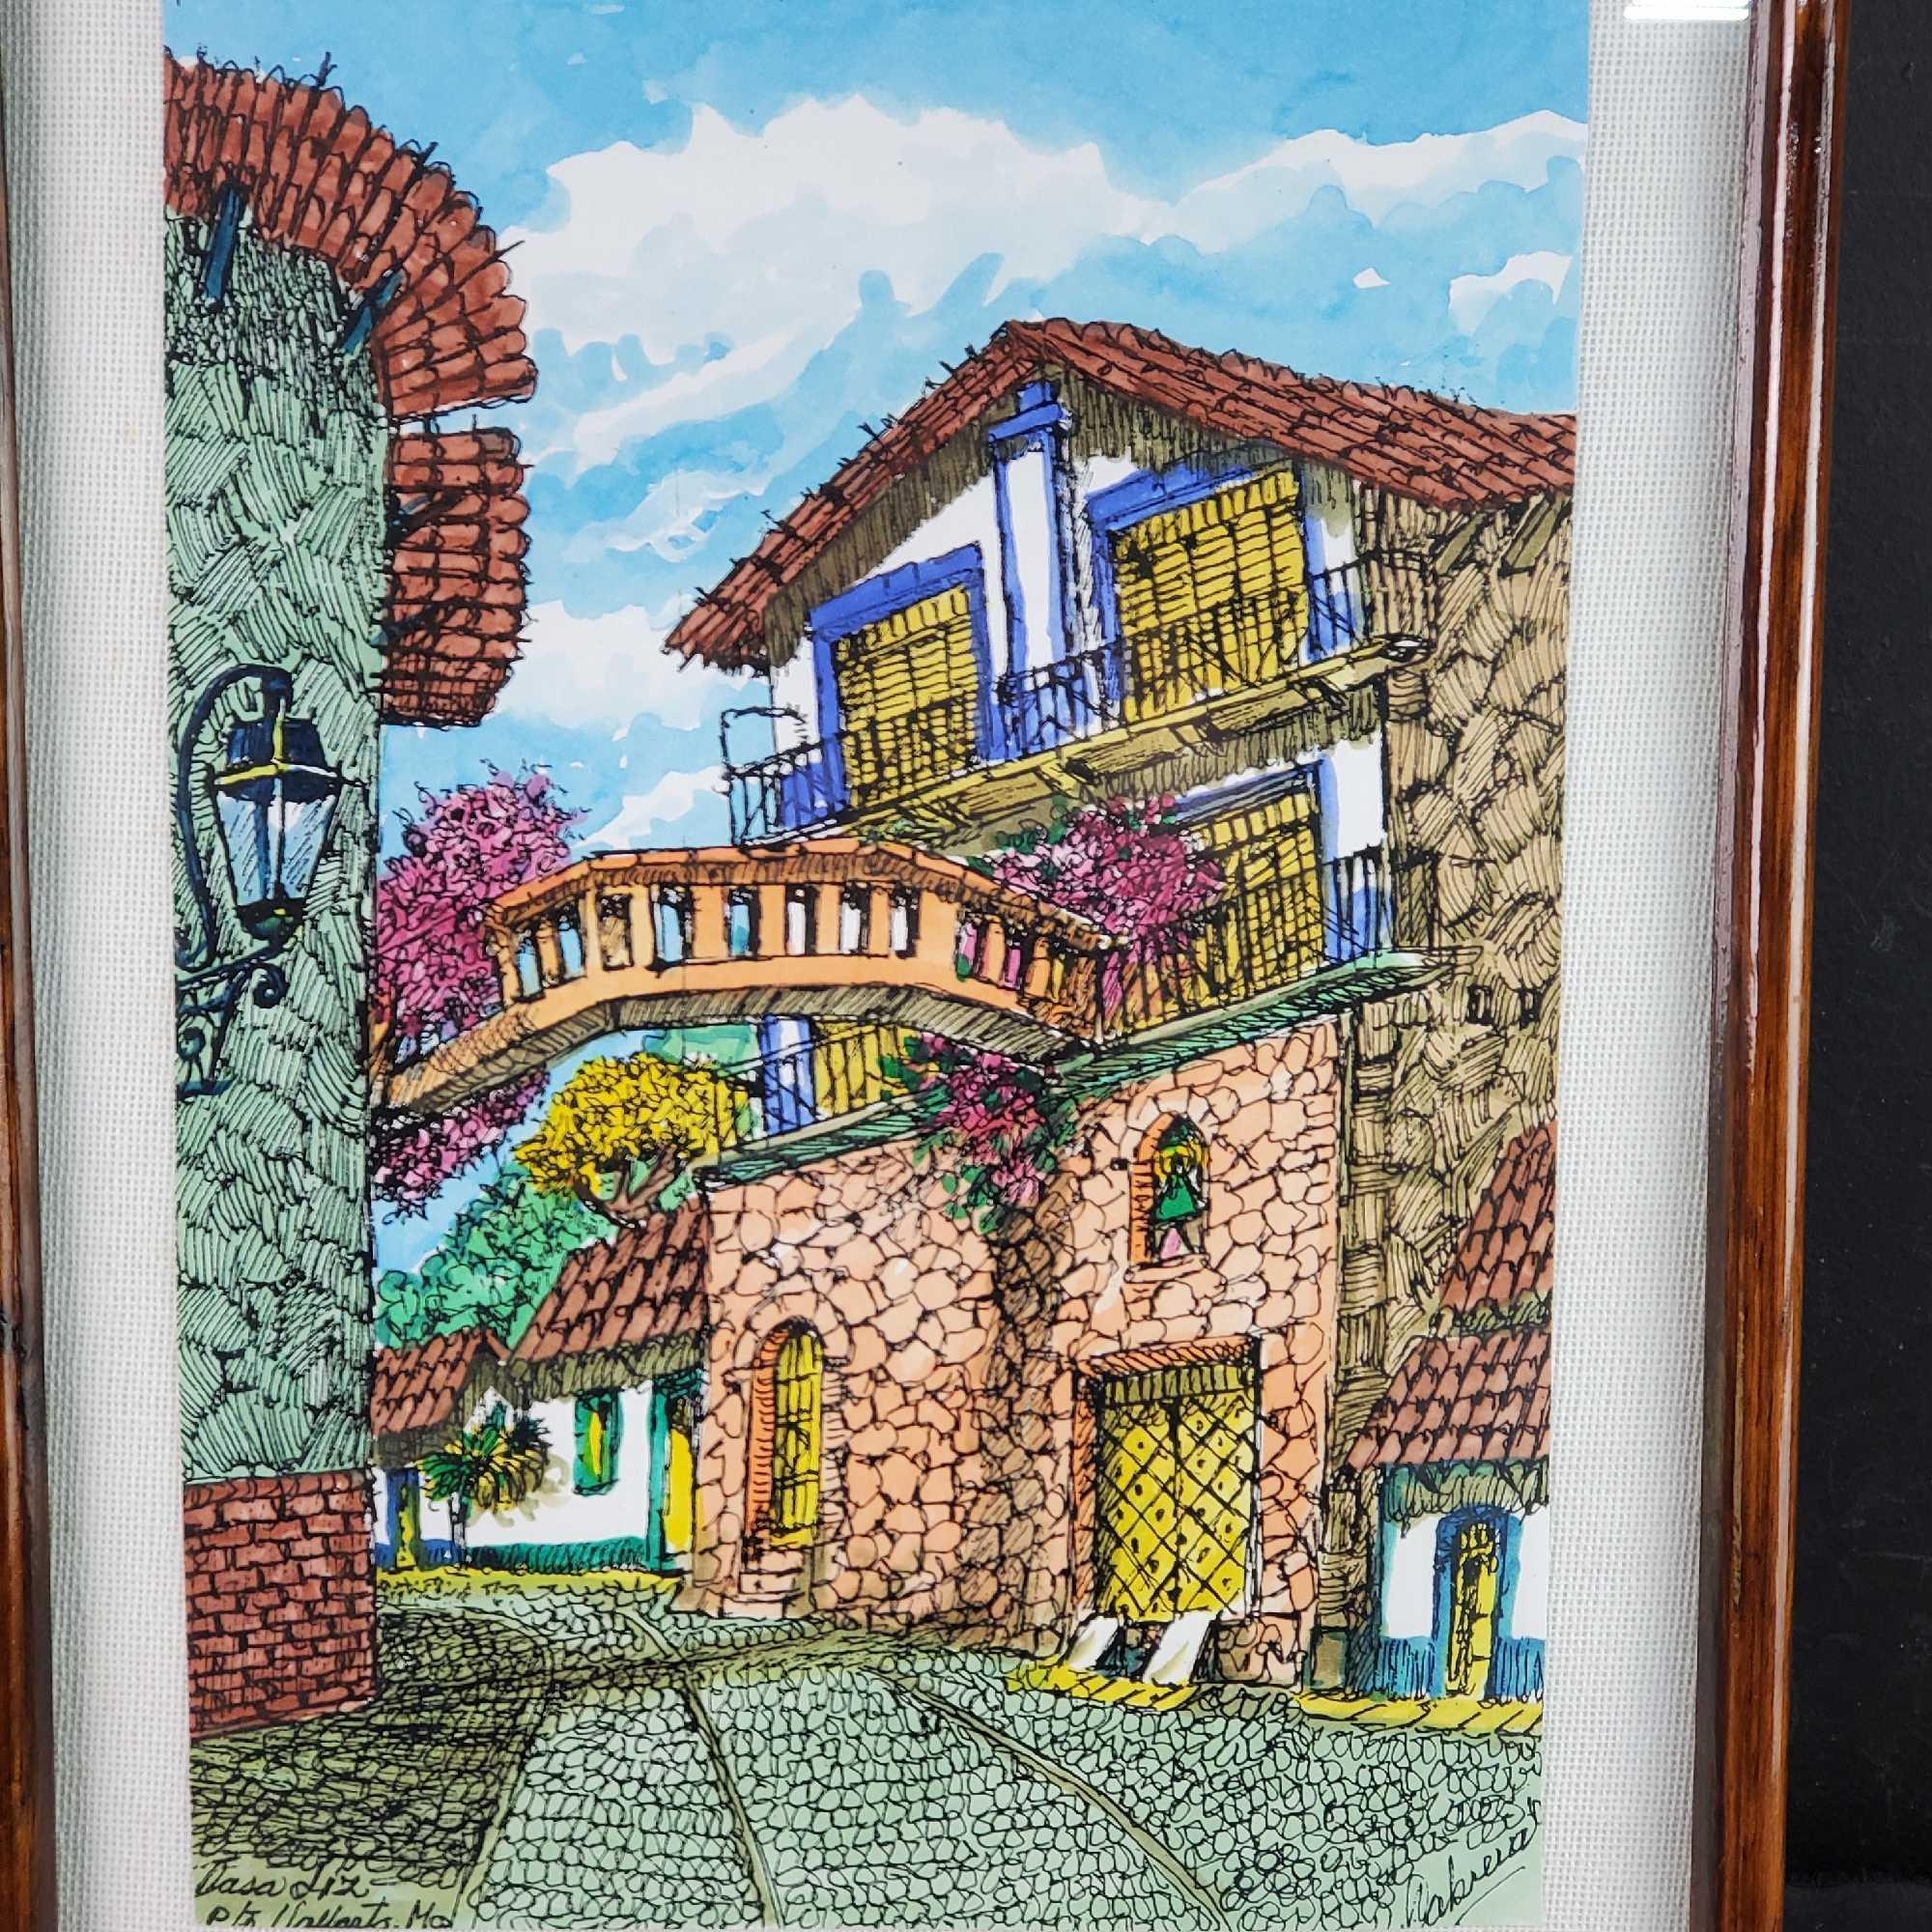 Lot of 2 framed prints 1 with signature seacliff houses Pureto Vallarta